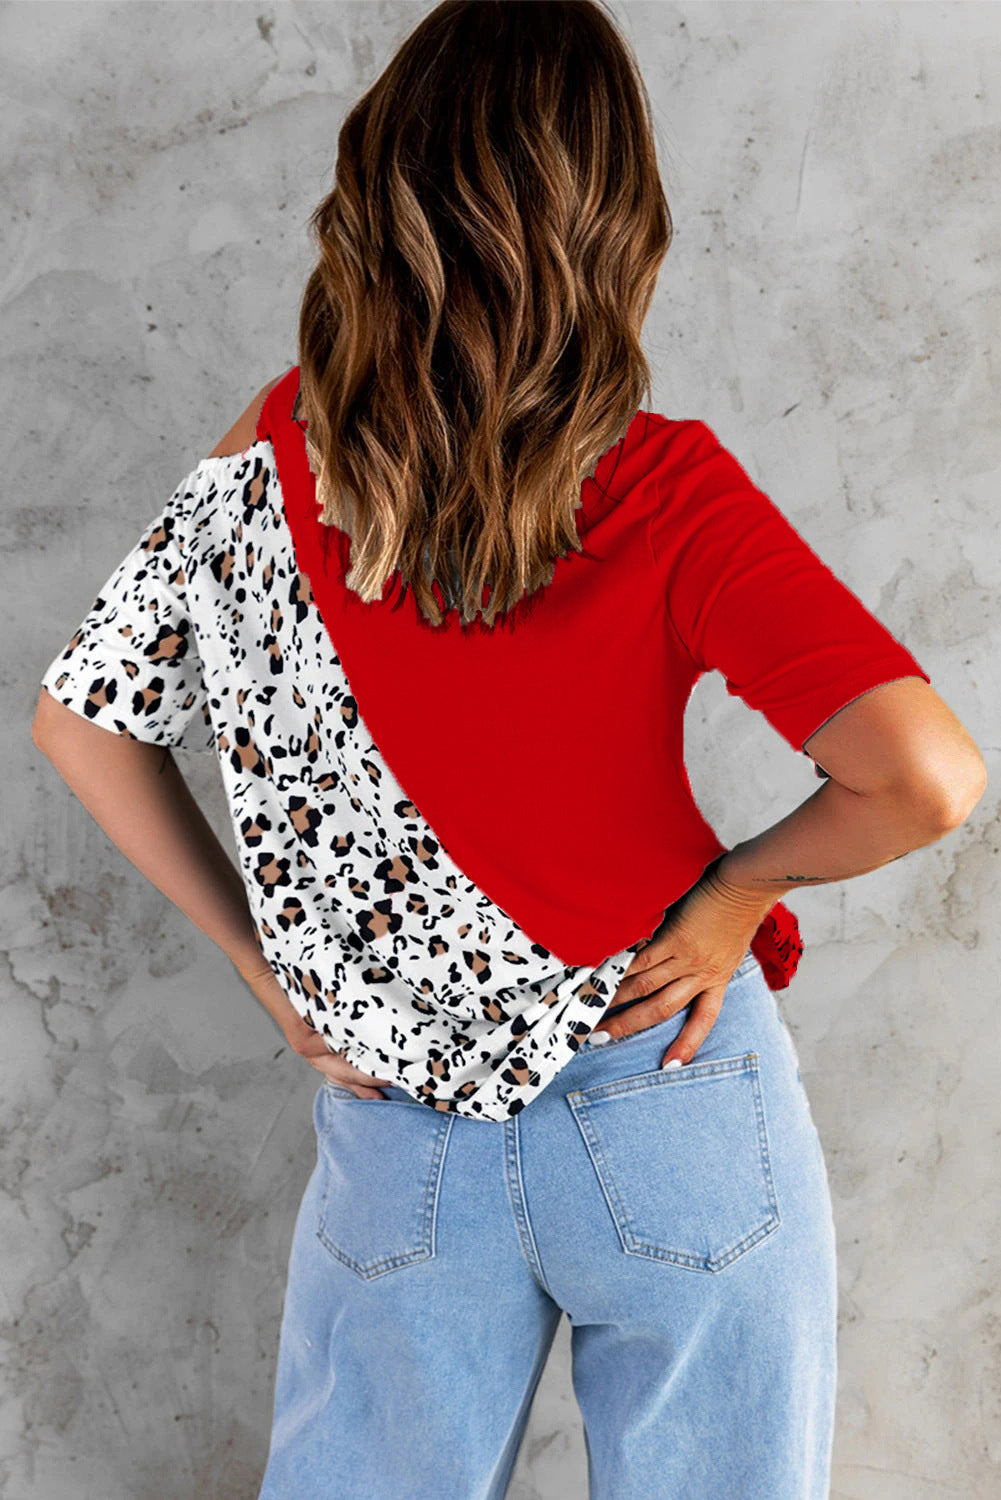 Casual Leopard Print Short Sleeves T Shirts for Women